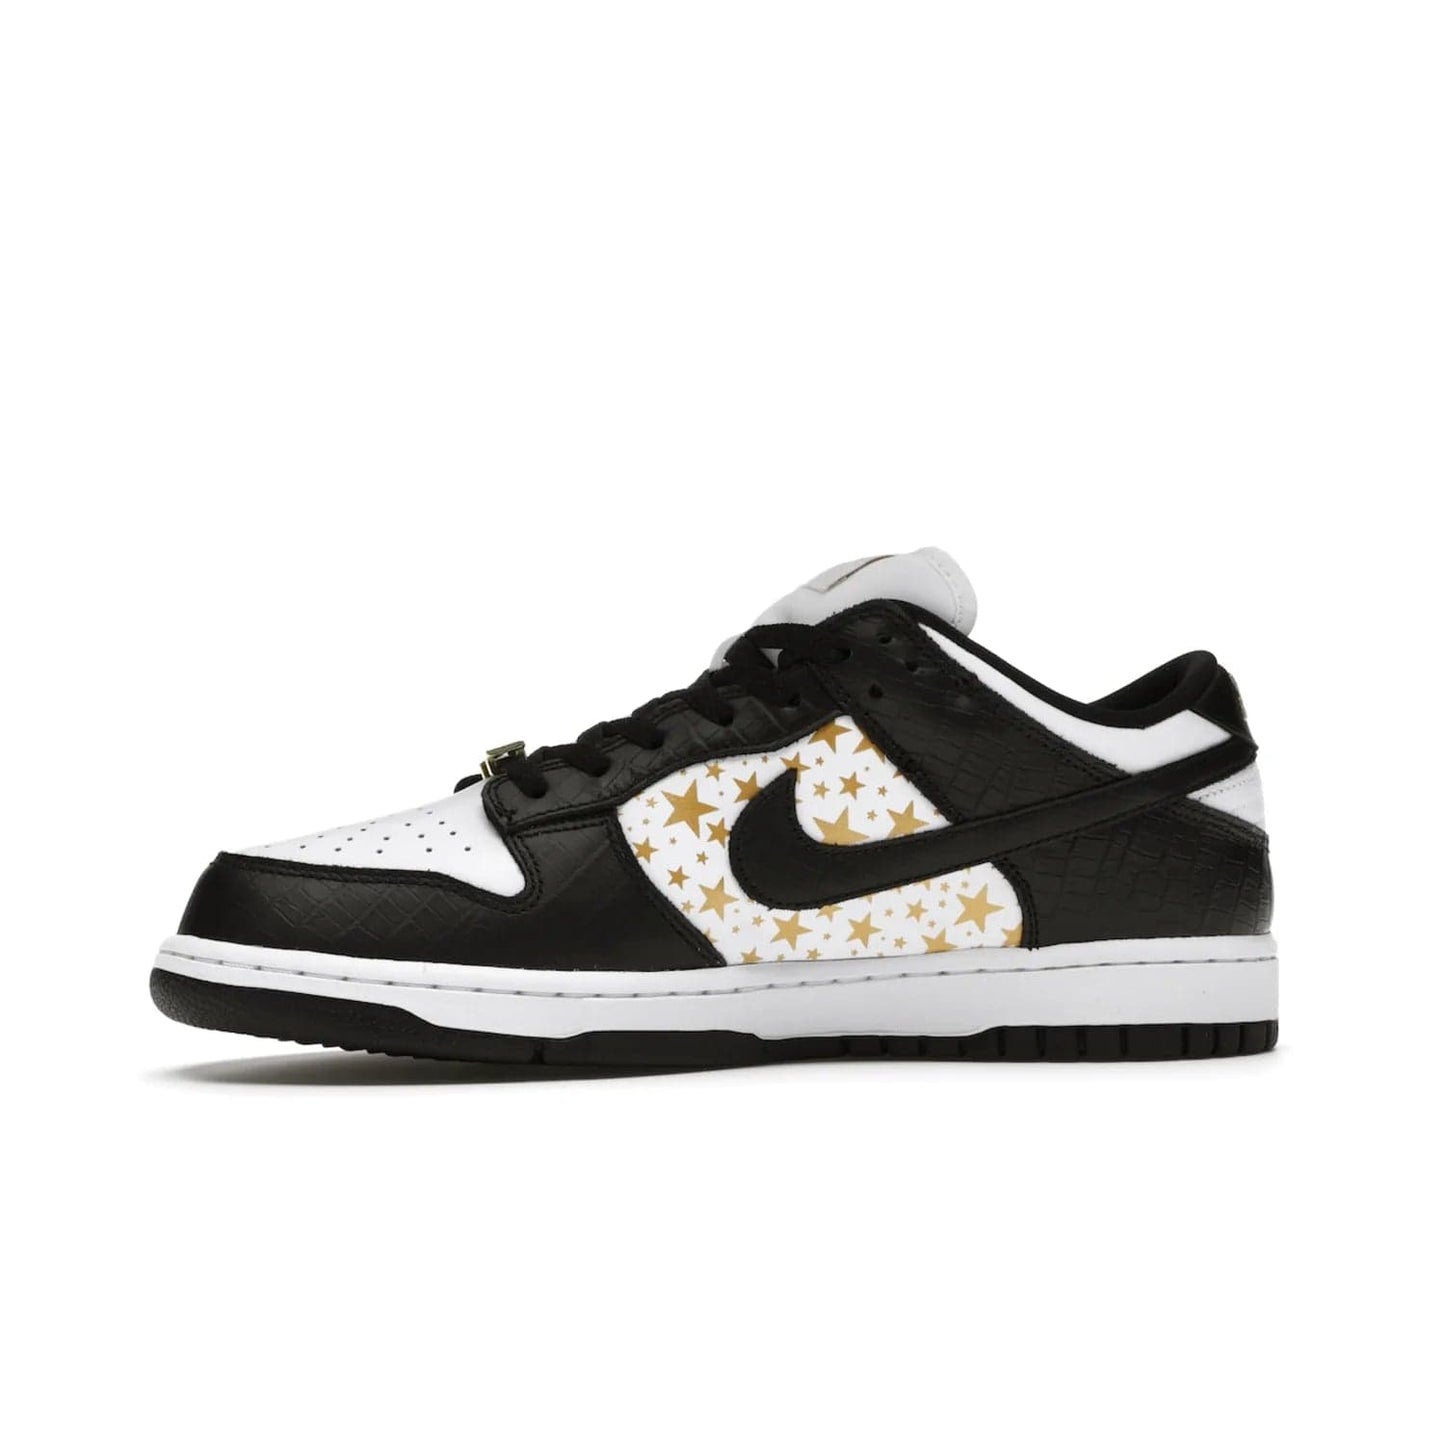 Nike SB Dunk Low Supreme Stars Black (2021) - Image 18 - Only at www.BallersClubKickz.com - Retro style and signature details make the Nike SB Dunk Low Supreme Black a must-have. This special edition shoe features a white leather upper and black croc skin overlays complemented by gold stars and deubré. Enjoy a piece of SB history and grab yours today.